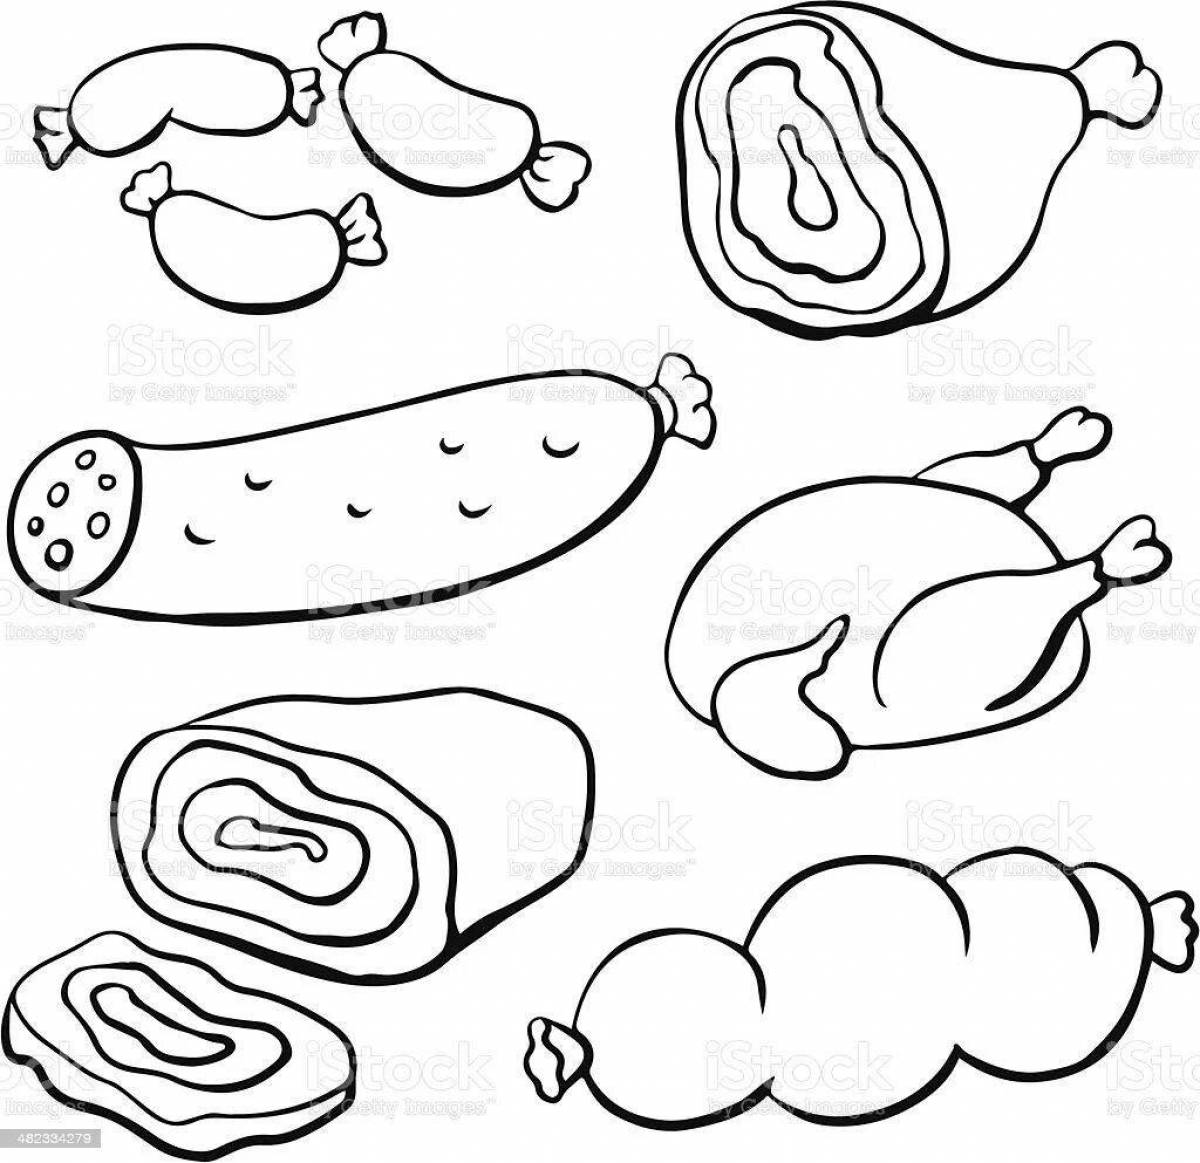 Fun coloring pages for preschoolers